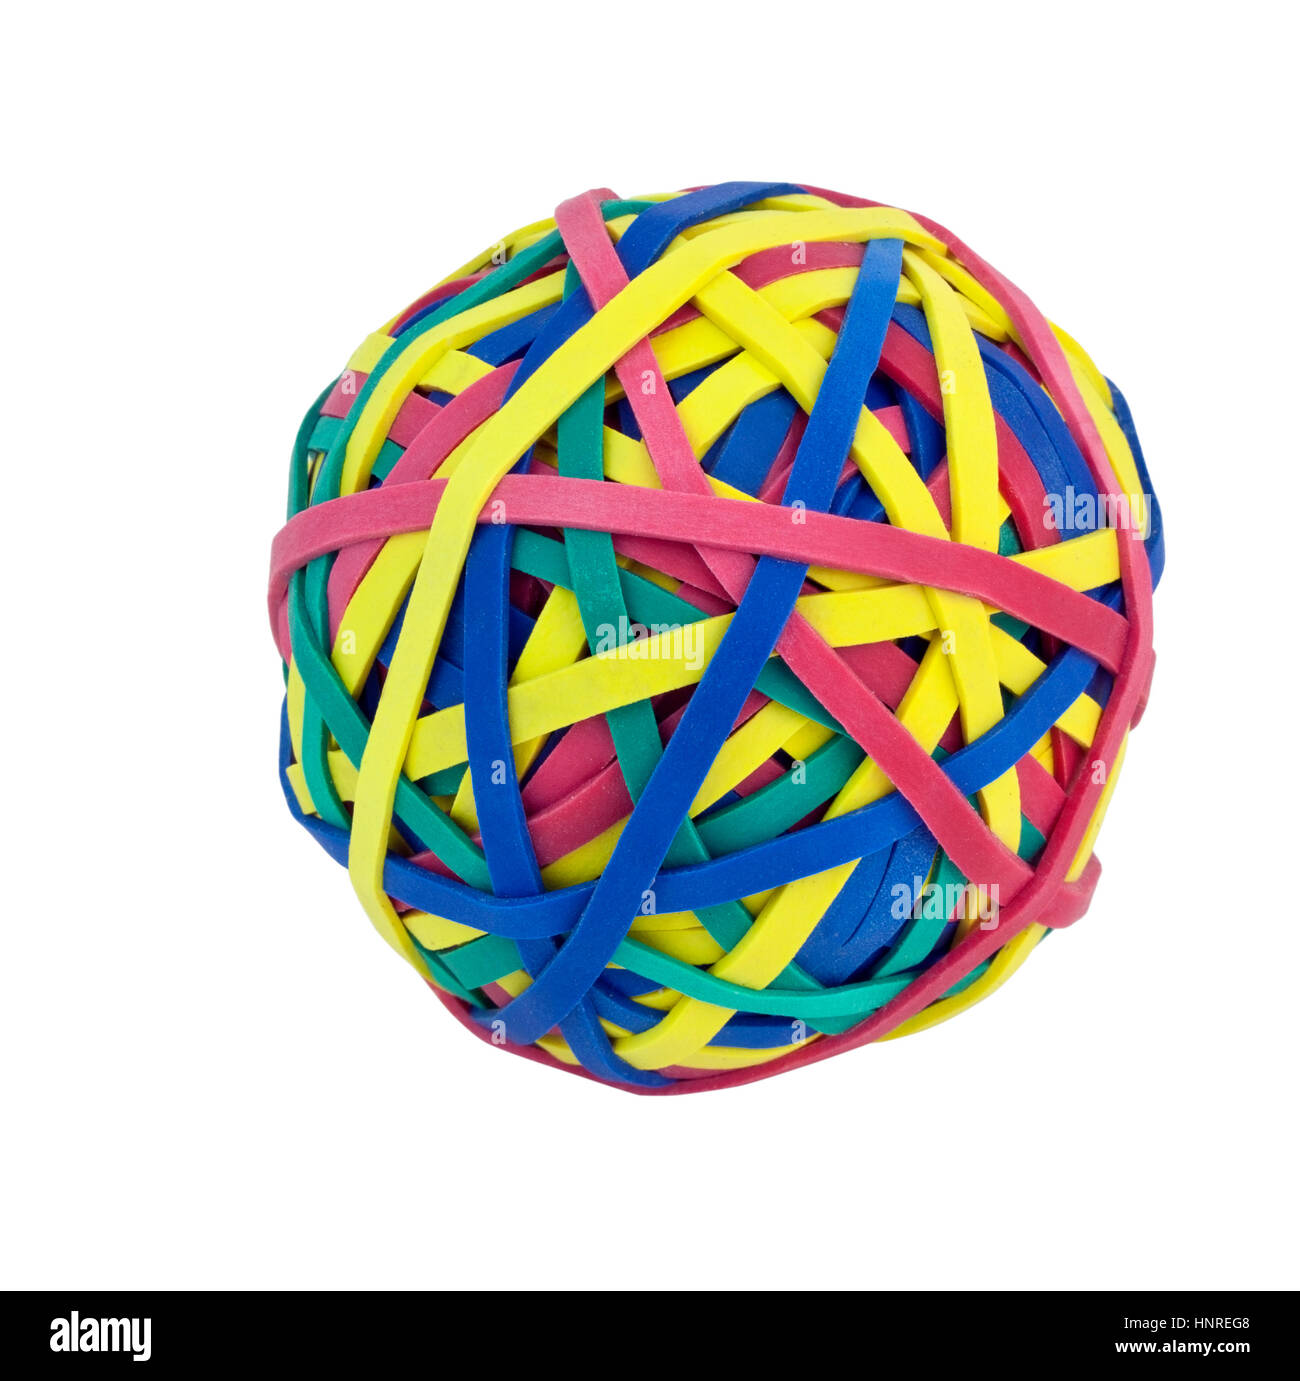 Colorful rubber band ball. Isolated on white. Stock Photo